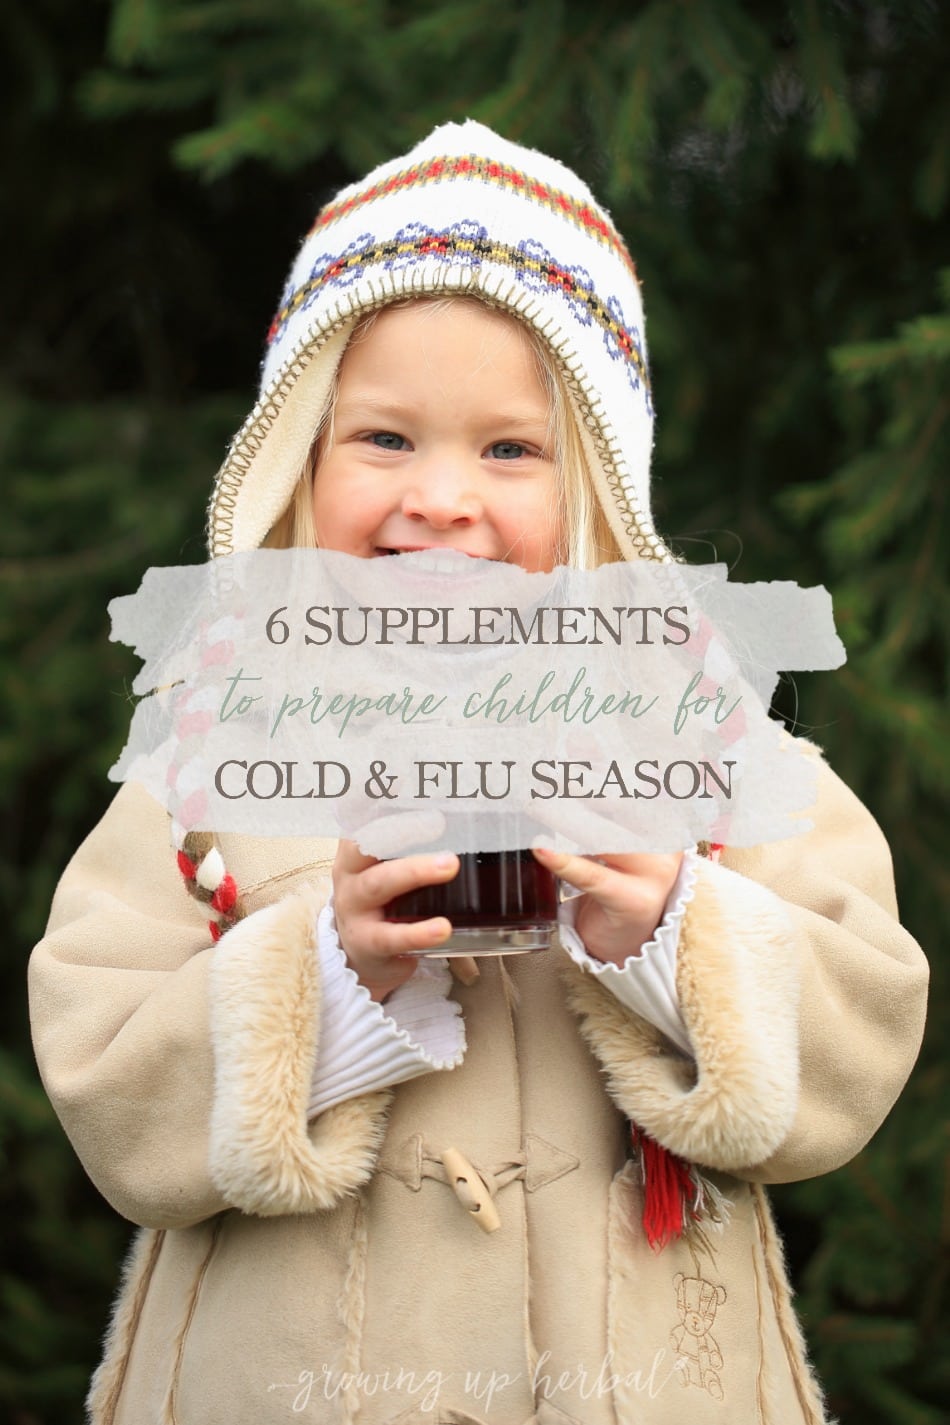 6 Supplements To Prepare Children For Cold And Flu Season | GrowingUpHerbal.com | Cold and flu season is coming. Here are 6 must-have supplements to prepare your children for cold and flu season to avoid sickness.